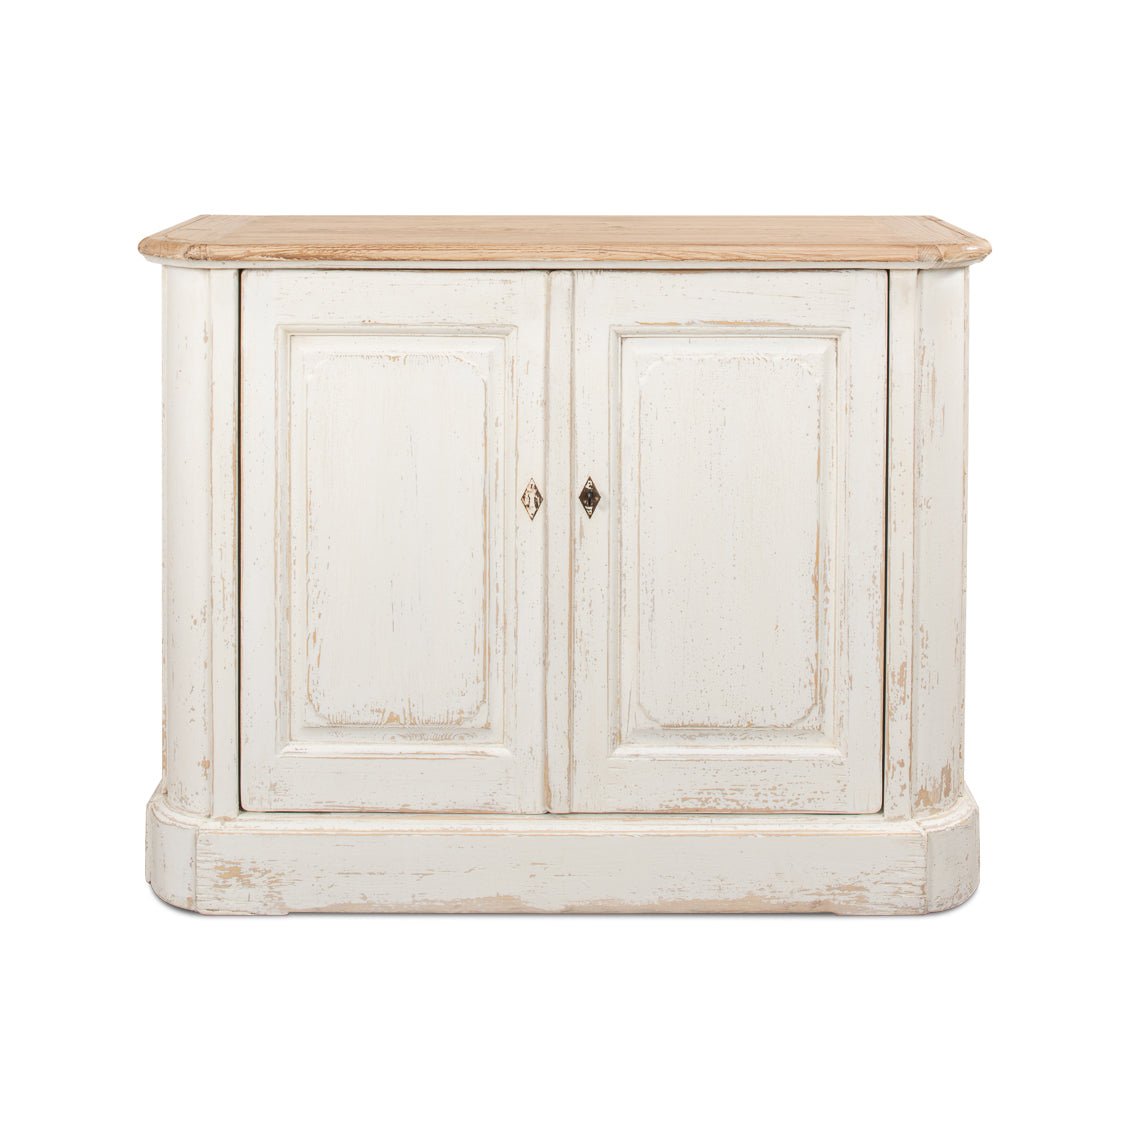 Antique White Painted Provincial Side Cabinet - English Georgian America